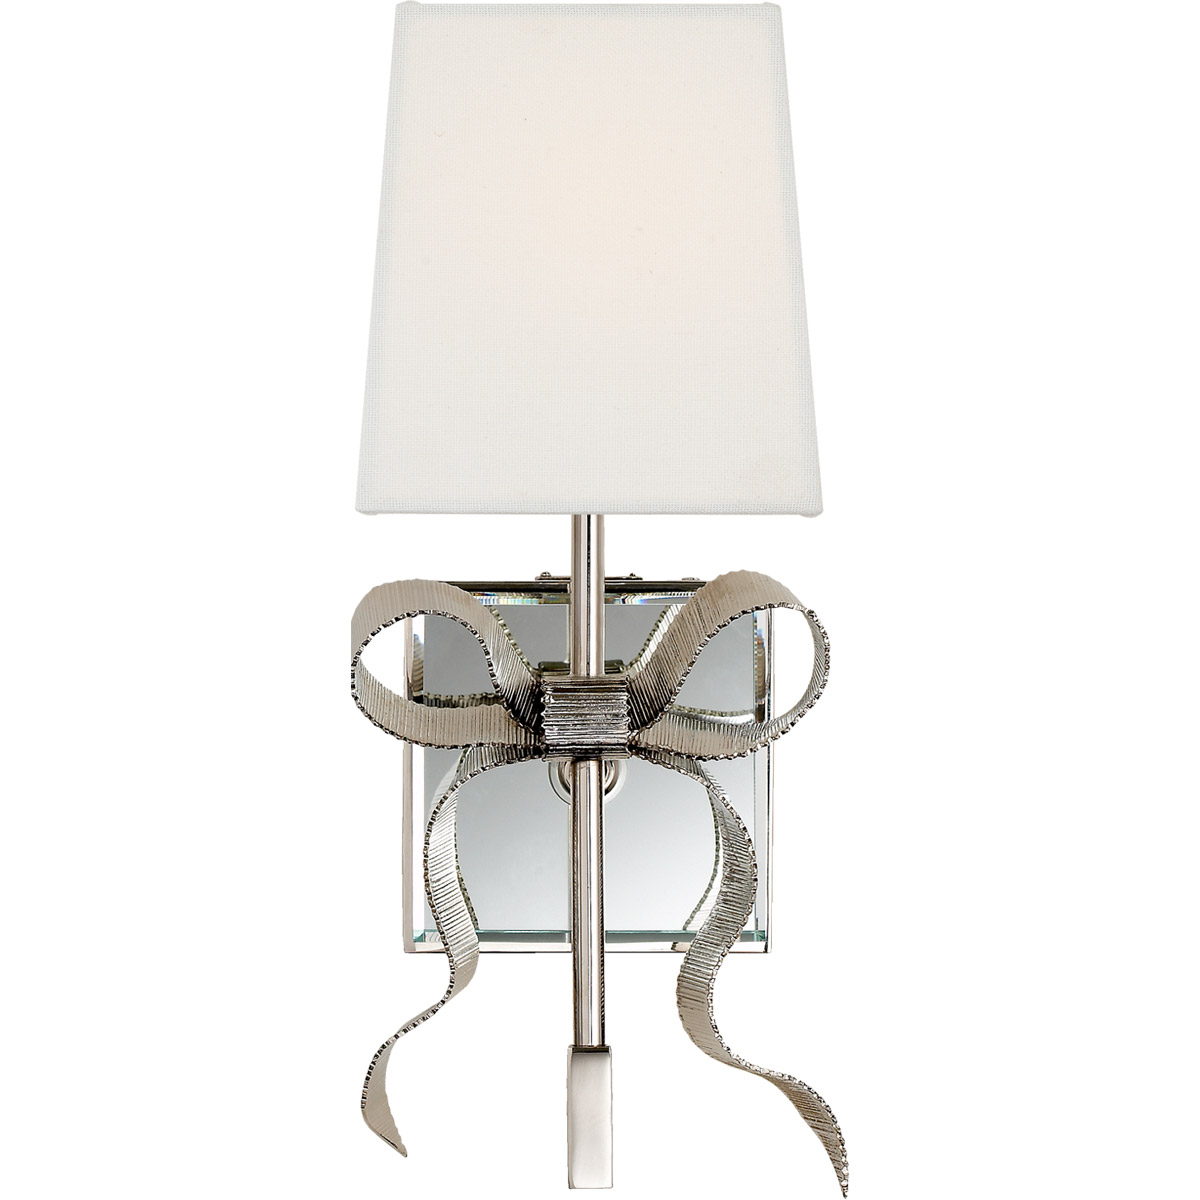 Visual Comfort Signature Collection Gros-Grain Wall Nickel Sconce Polished Visual Light in Cream Light inch Ellery Linen, york Small 1 5 | KS2008PN-L new spade kate Bow Comfort